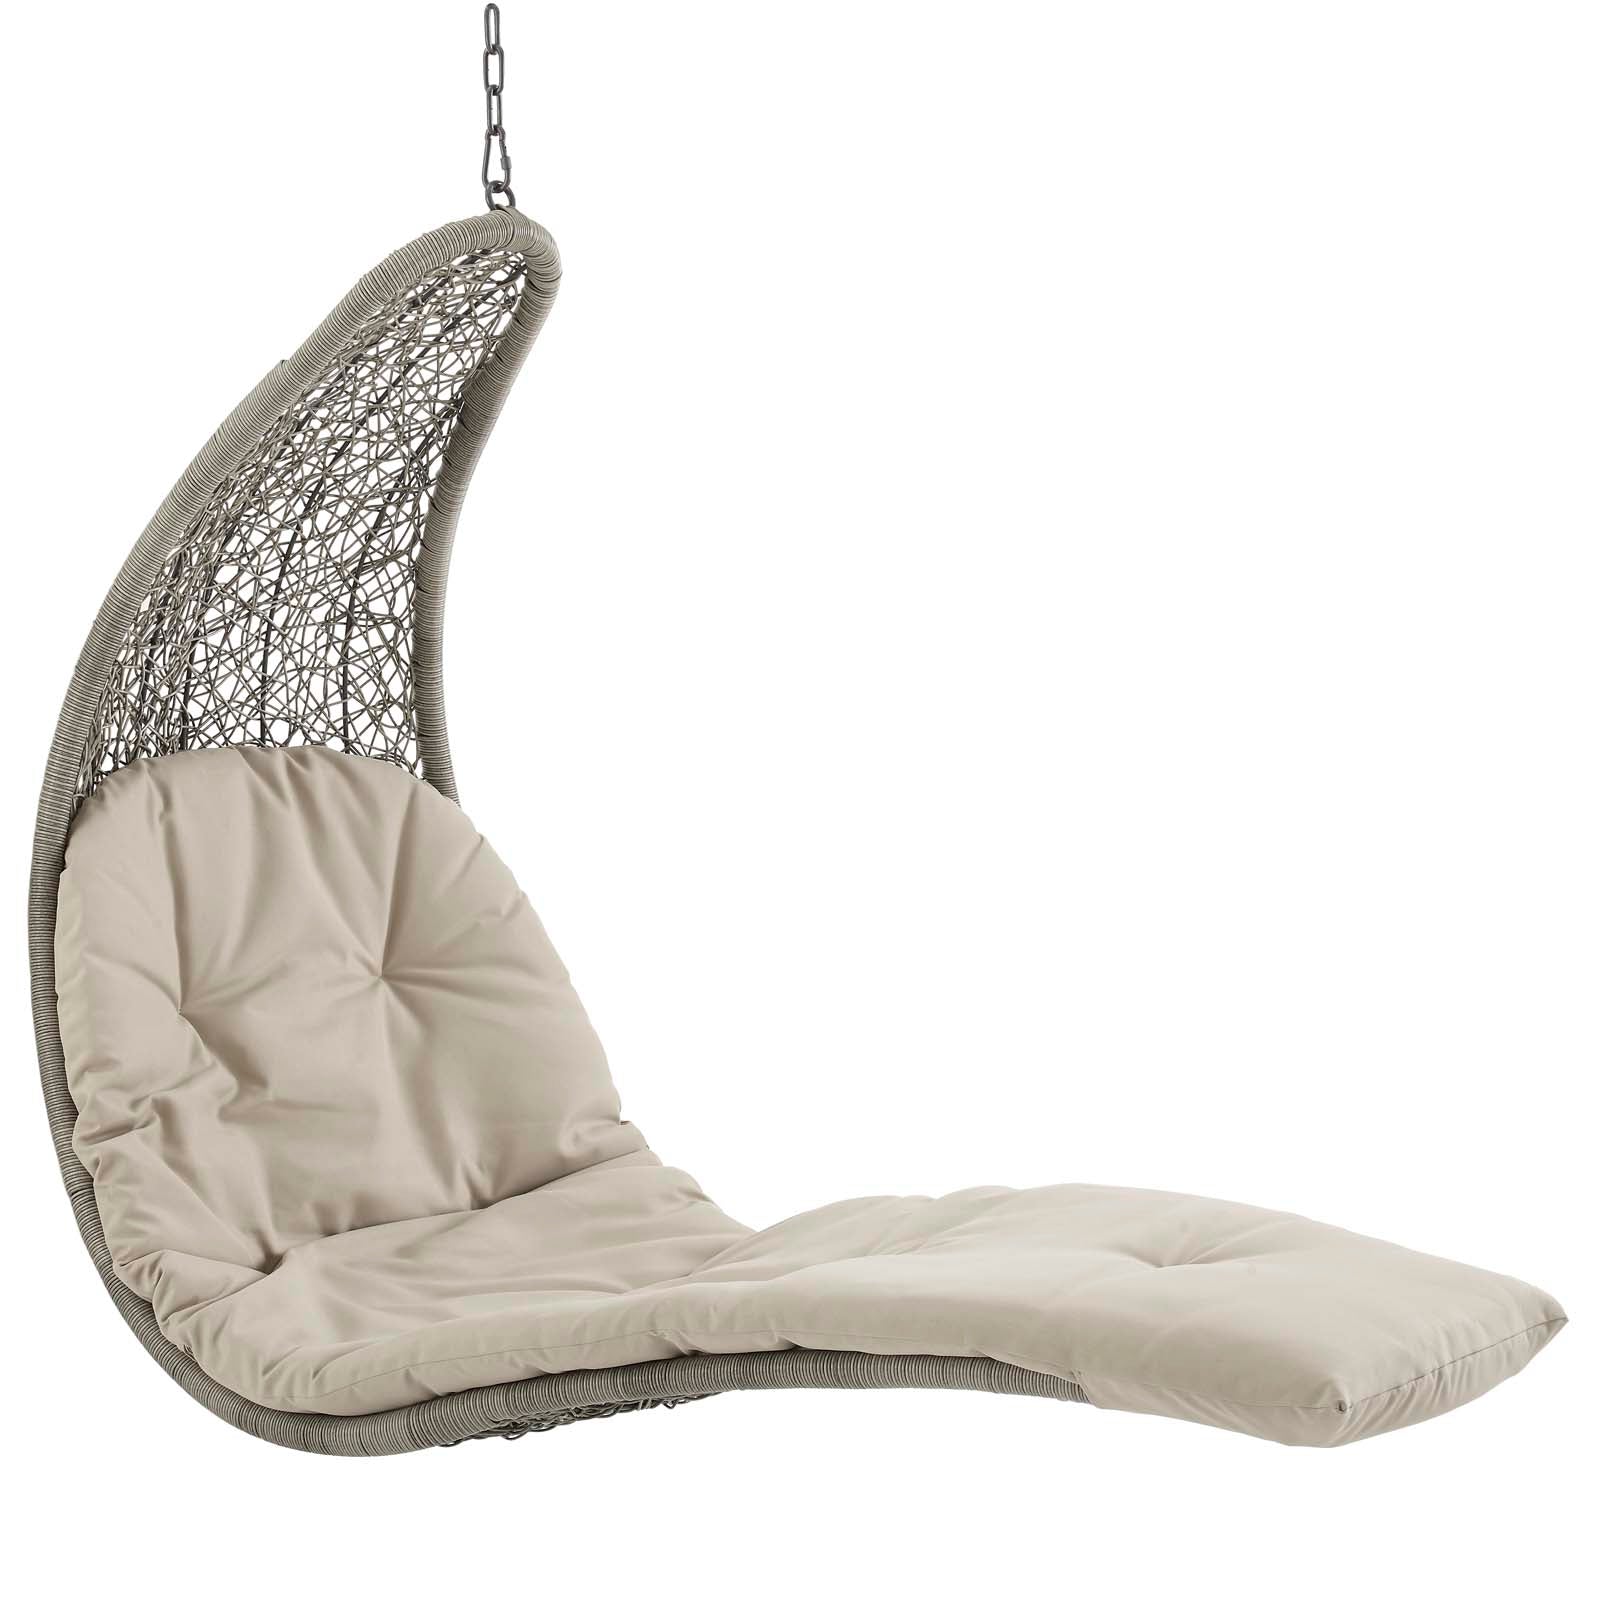 Modway Outdoor Swings - Landscape Hanging Chaise Lounge Outdoor Patio Swing Chair Light Gray Beige